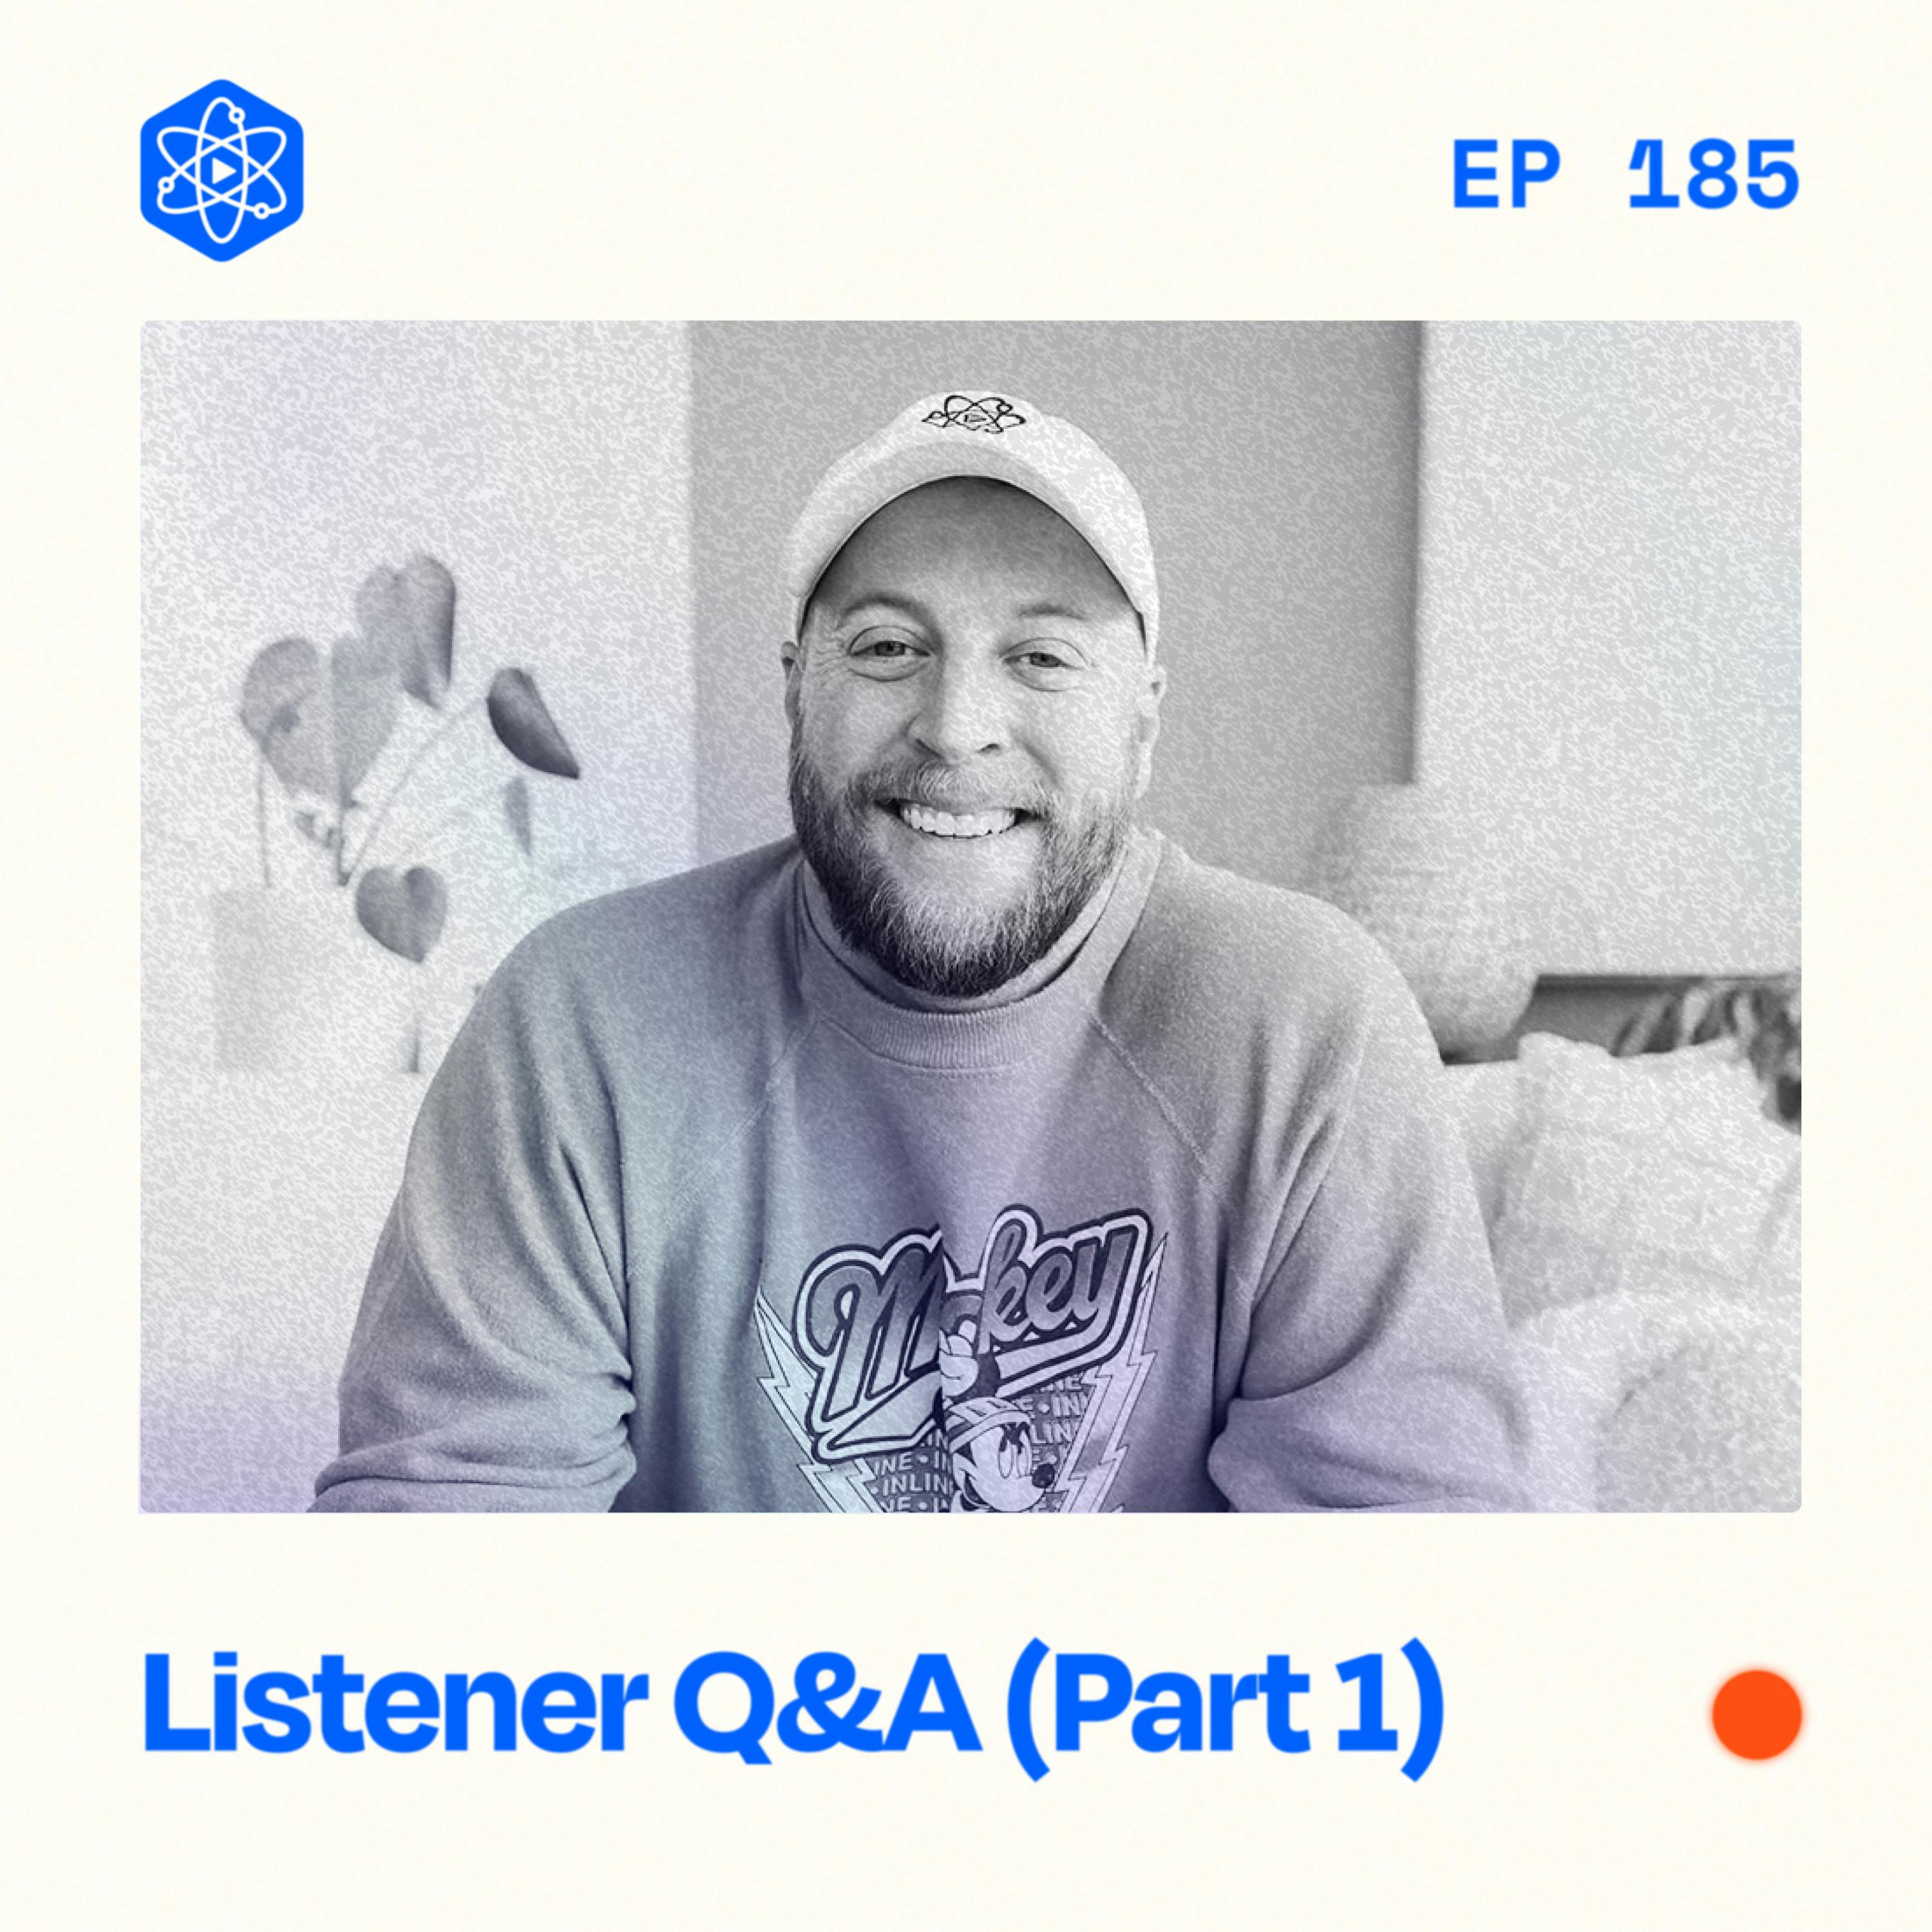 Listener Q&A (Part 1) – The downside of viral videos, publishing less edited content, how we prepare our episodes, and working with sponsors.